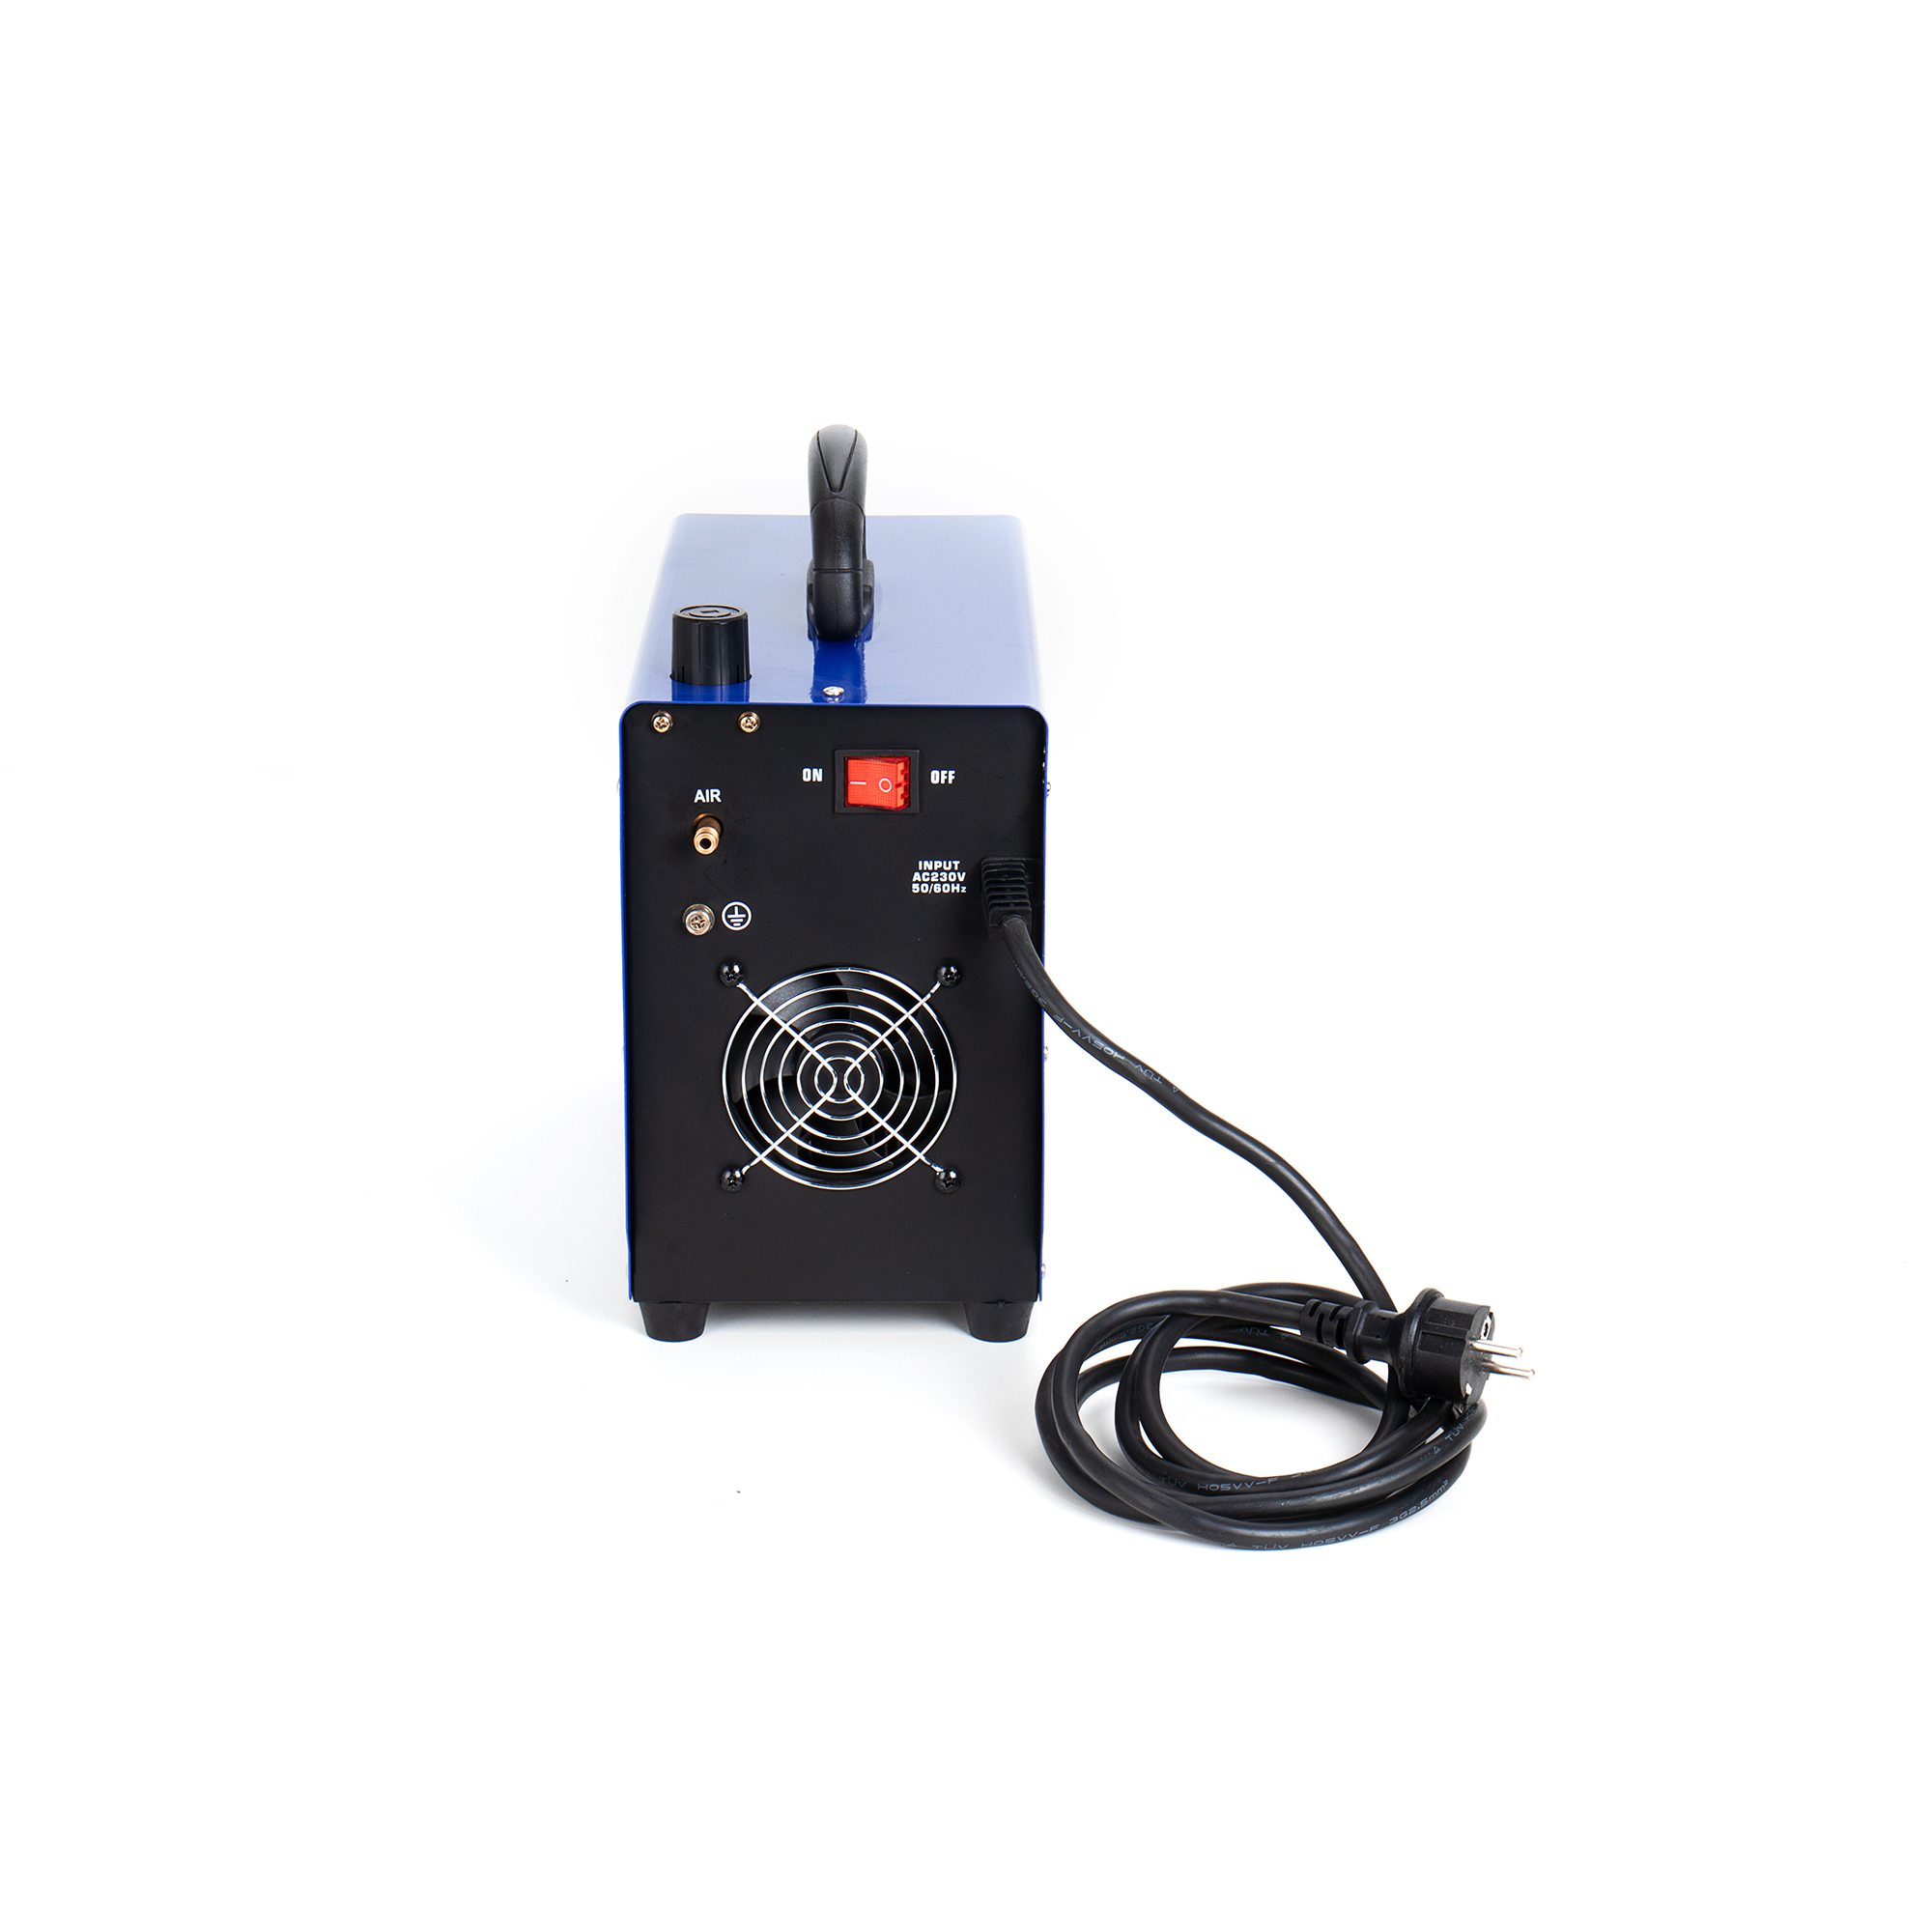 Plasma cutter CUT-45 with built-in air reducing valve